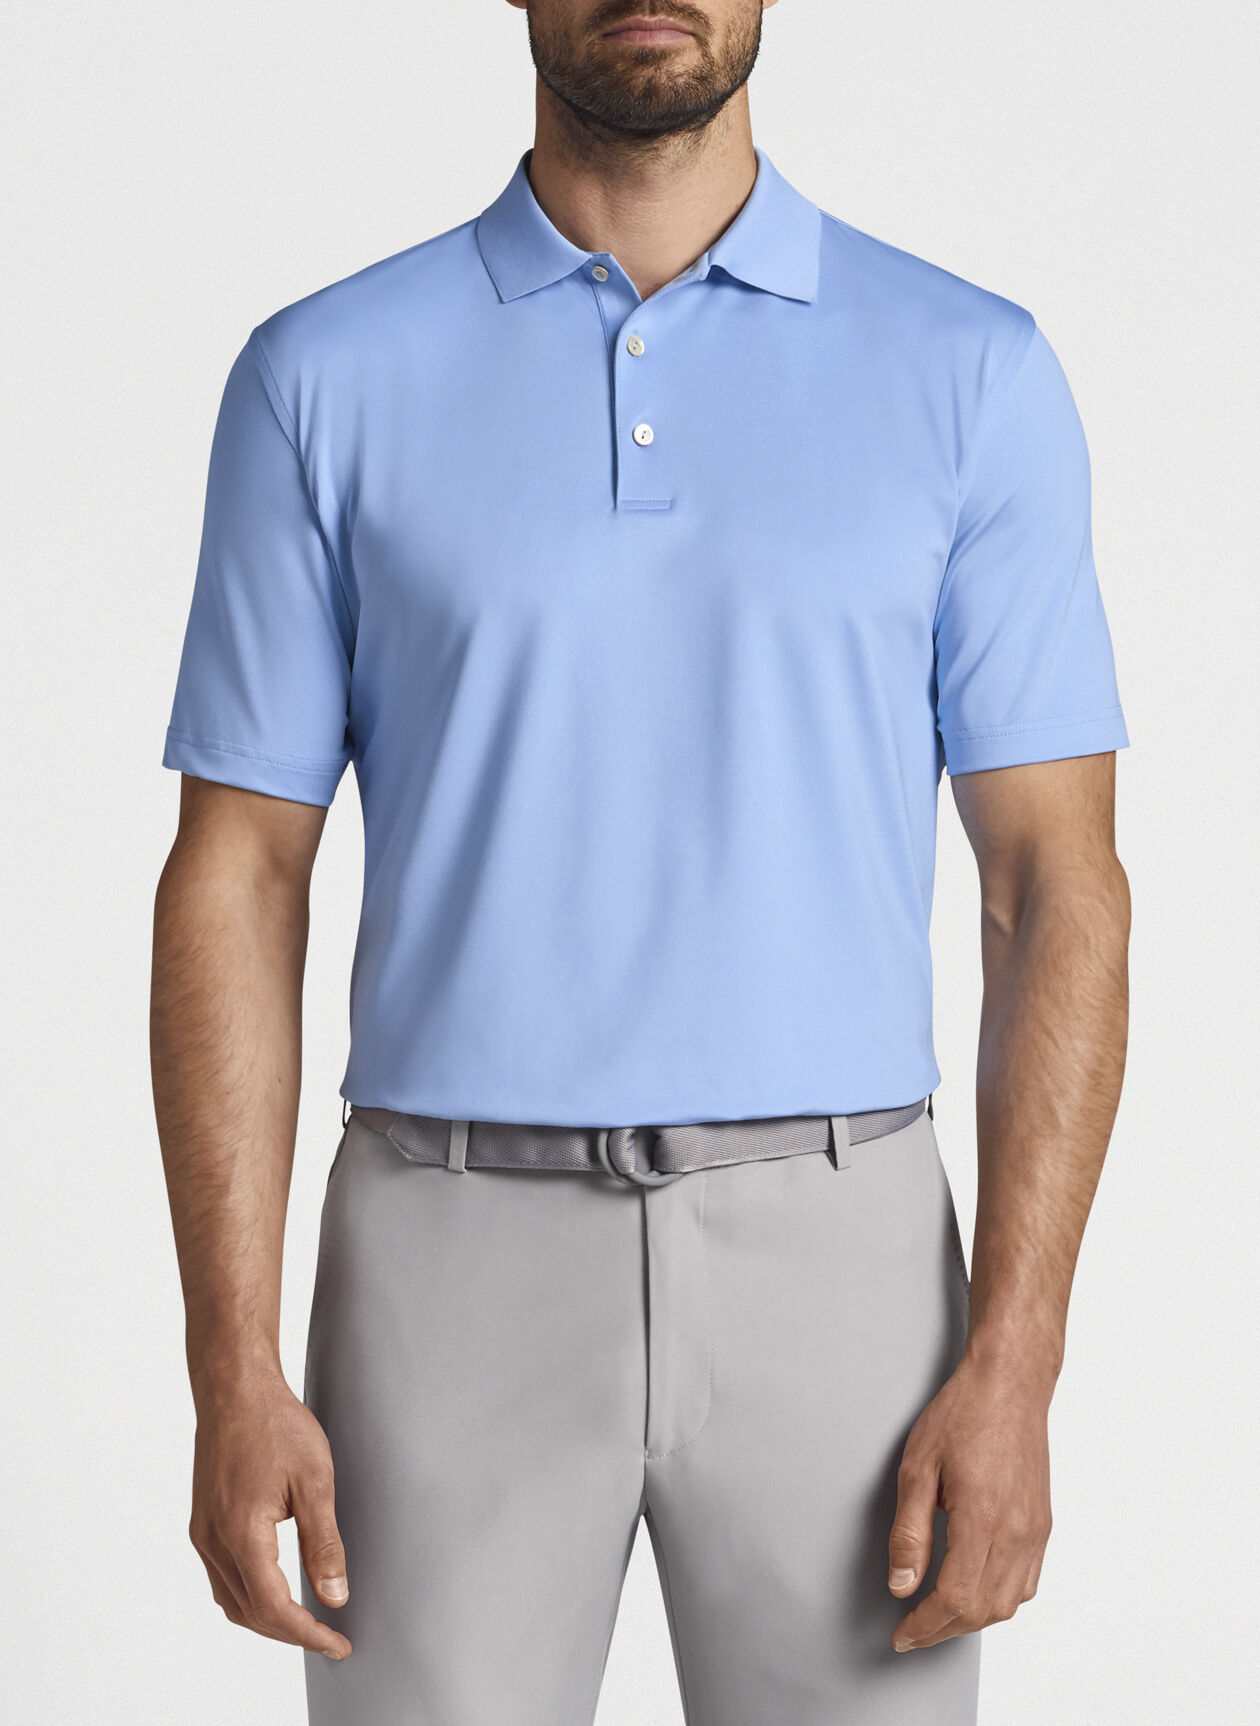 Previous Next crown sport Solid Performance Polo $94 + 3.9 out of 5 